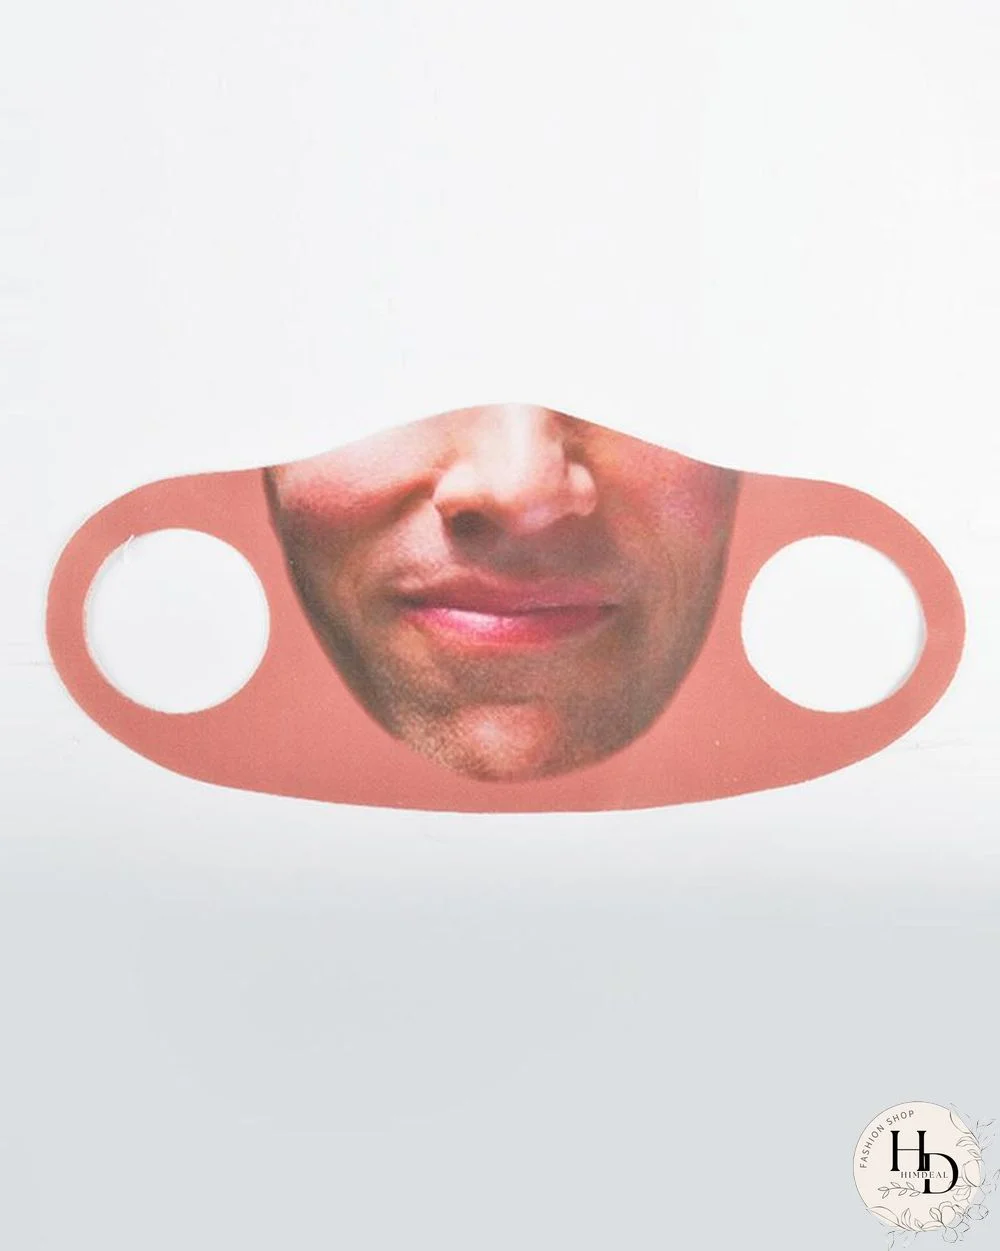 Face Emoji Print Breathable Mouth Mask